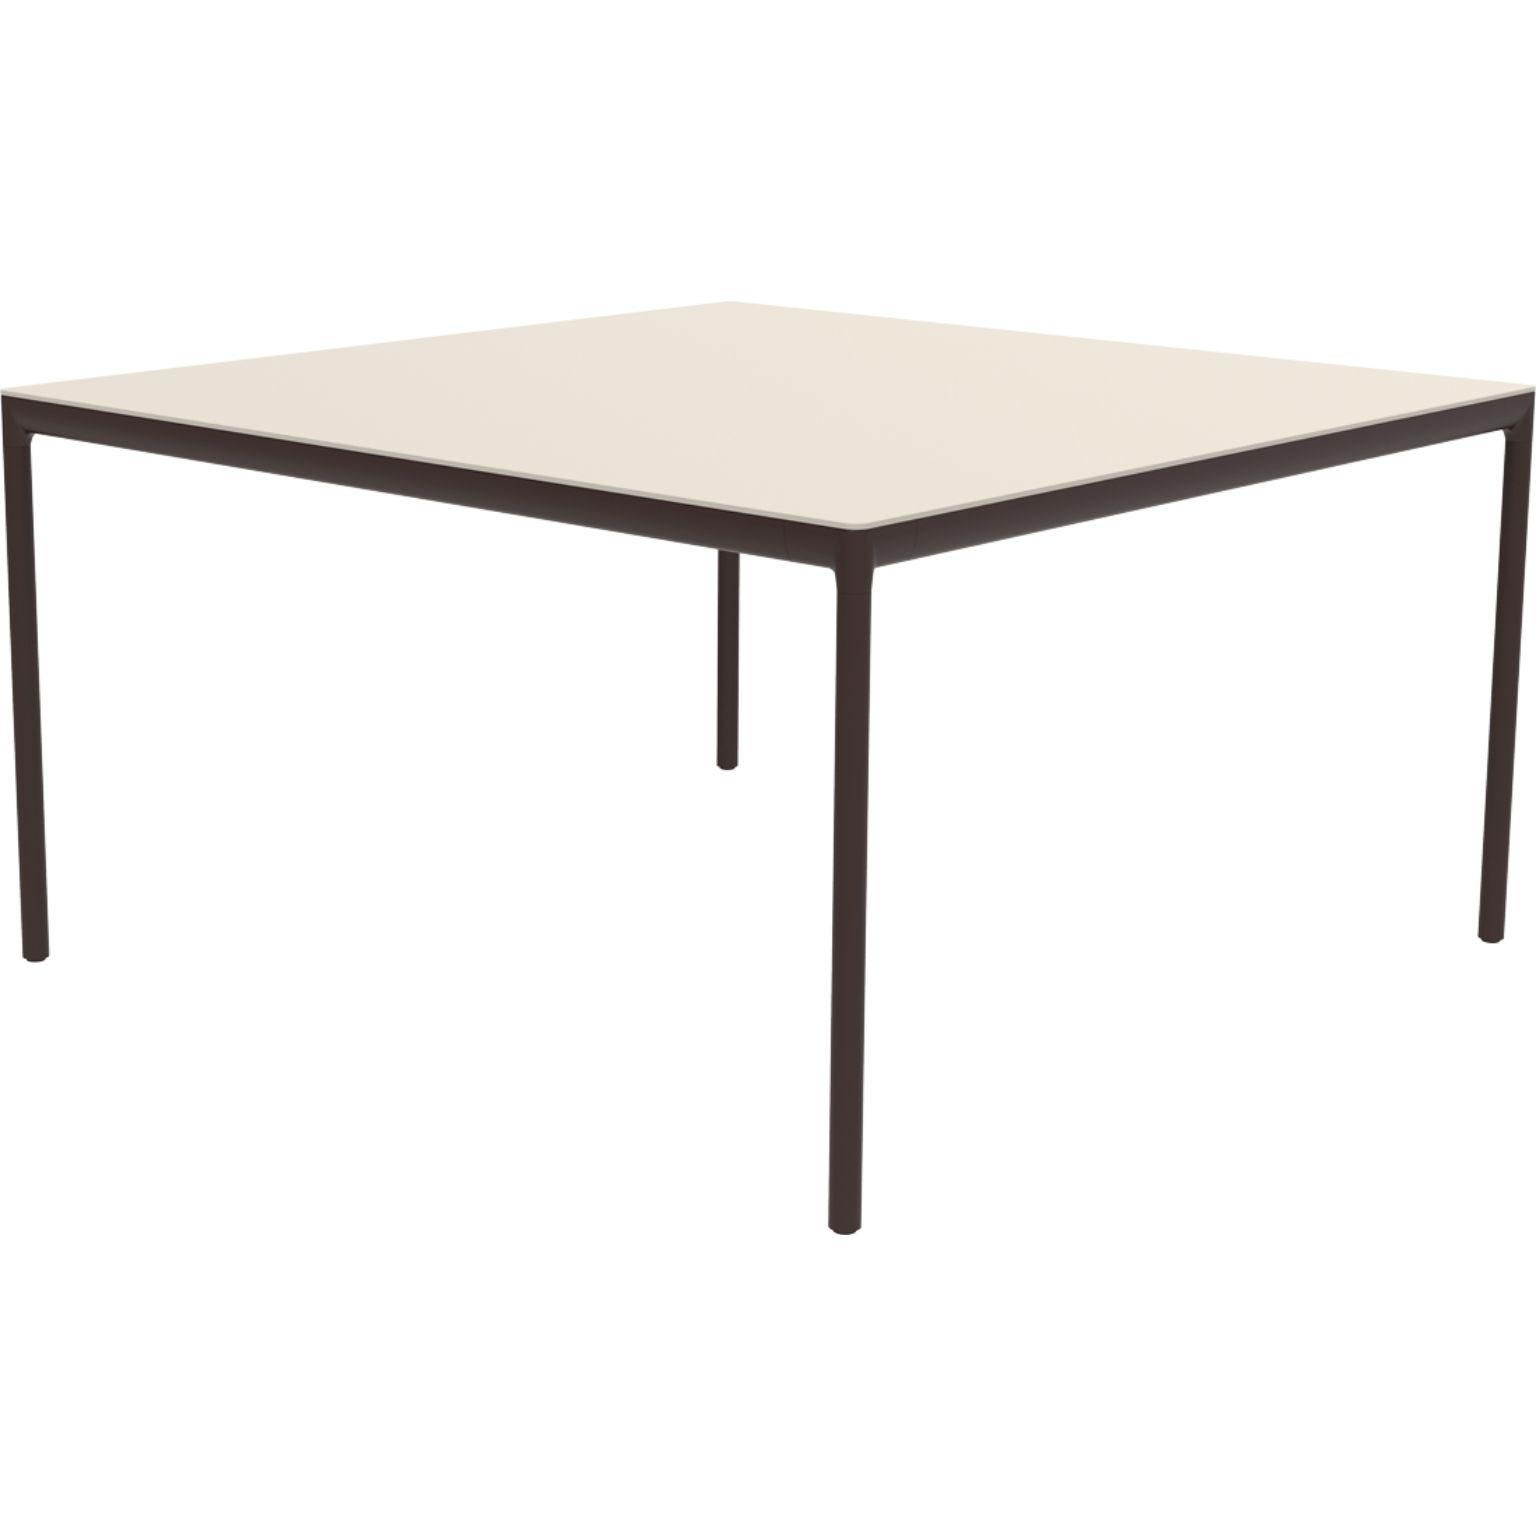 Ribbons chocolate 138 coffee table by MOWEE
Dimensions: D138 x W138 x H75 cm.
Material: Aluminum and HPL top.
Weight: 23 kg.
Also available in different colors and finishes. (HPL Black Edge or Neolith top).

An unmistakable collection for its